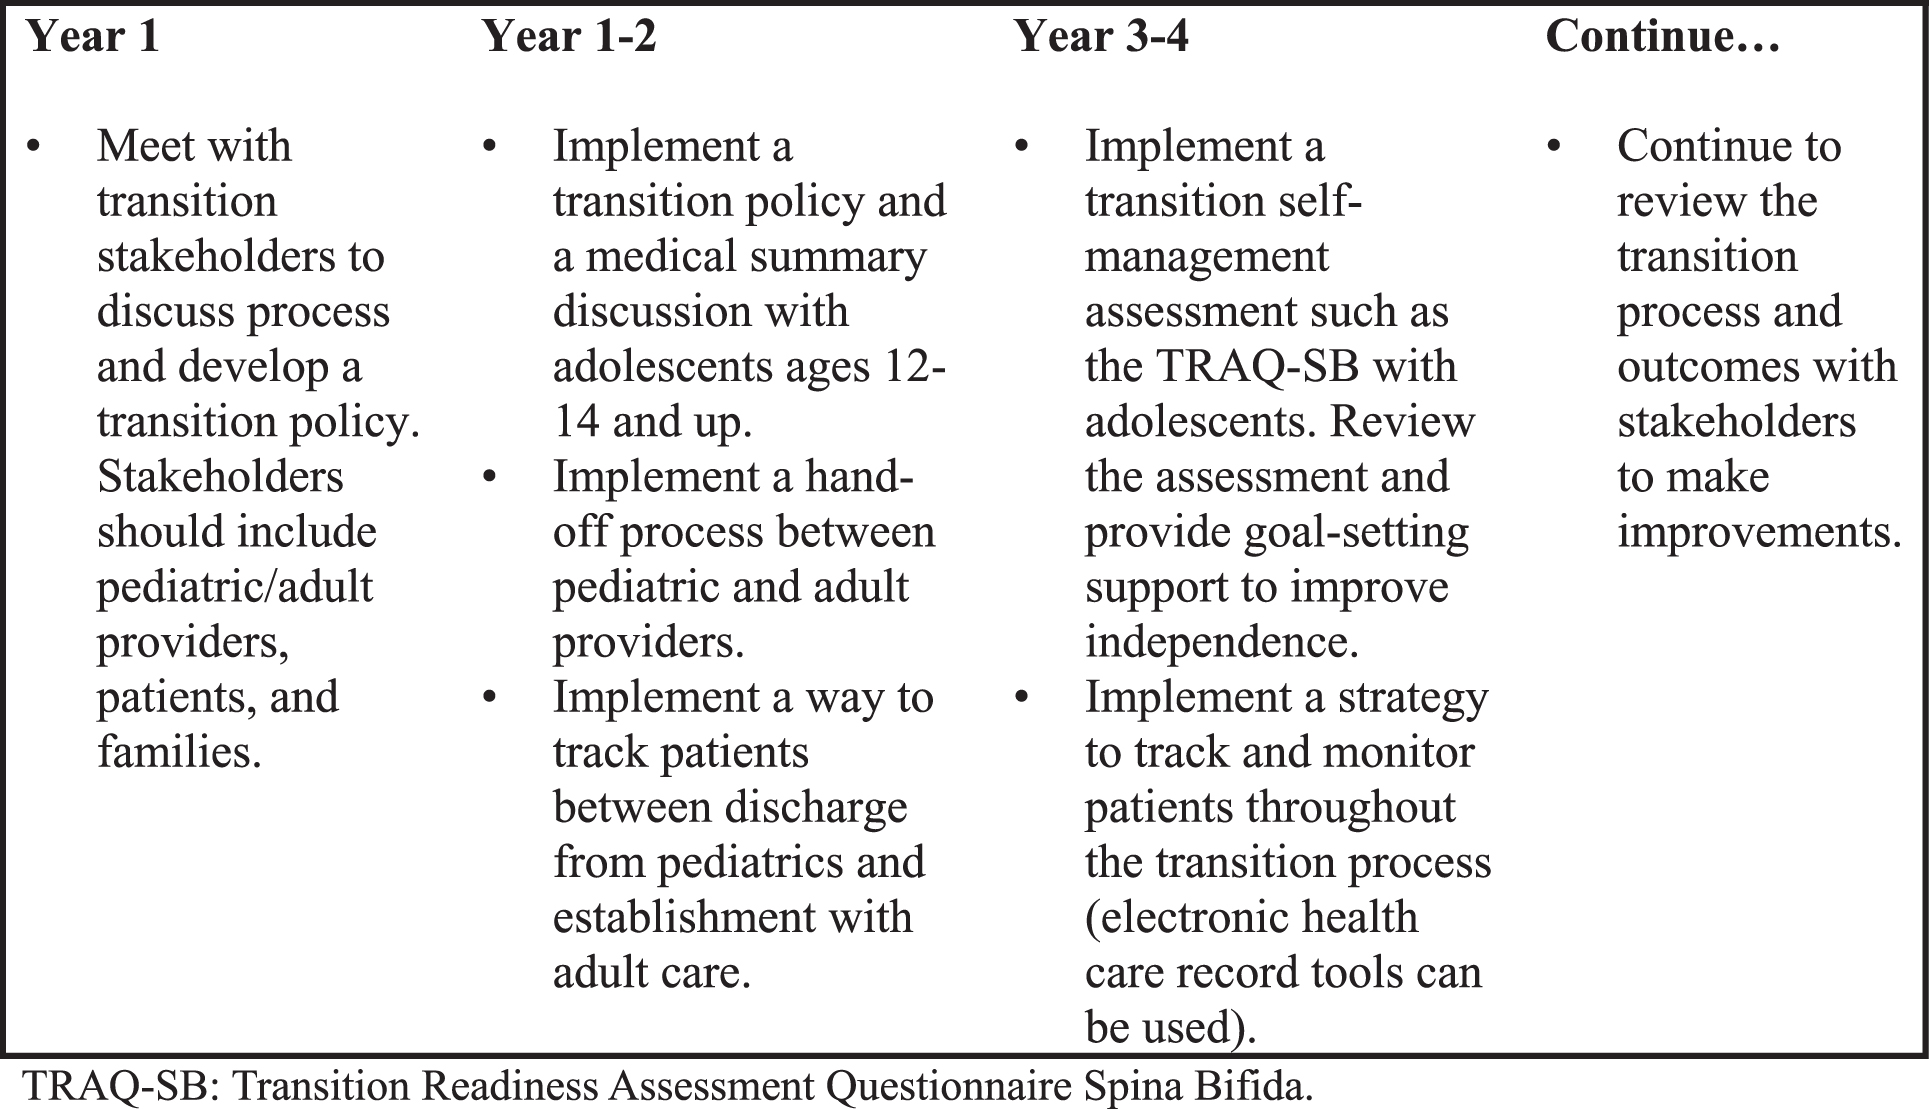 Suggested timeline for implementing a structured transition to adult care clinical process.